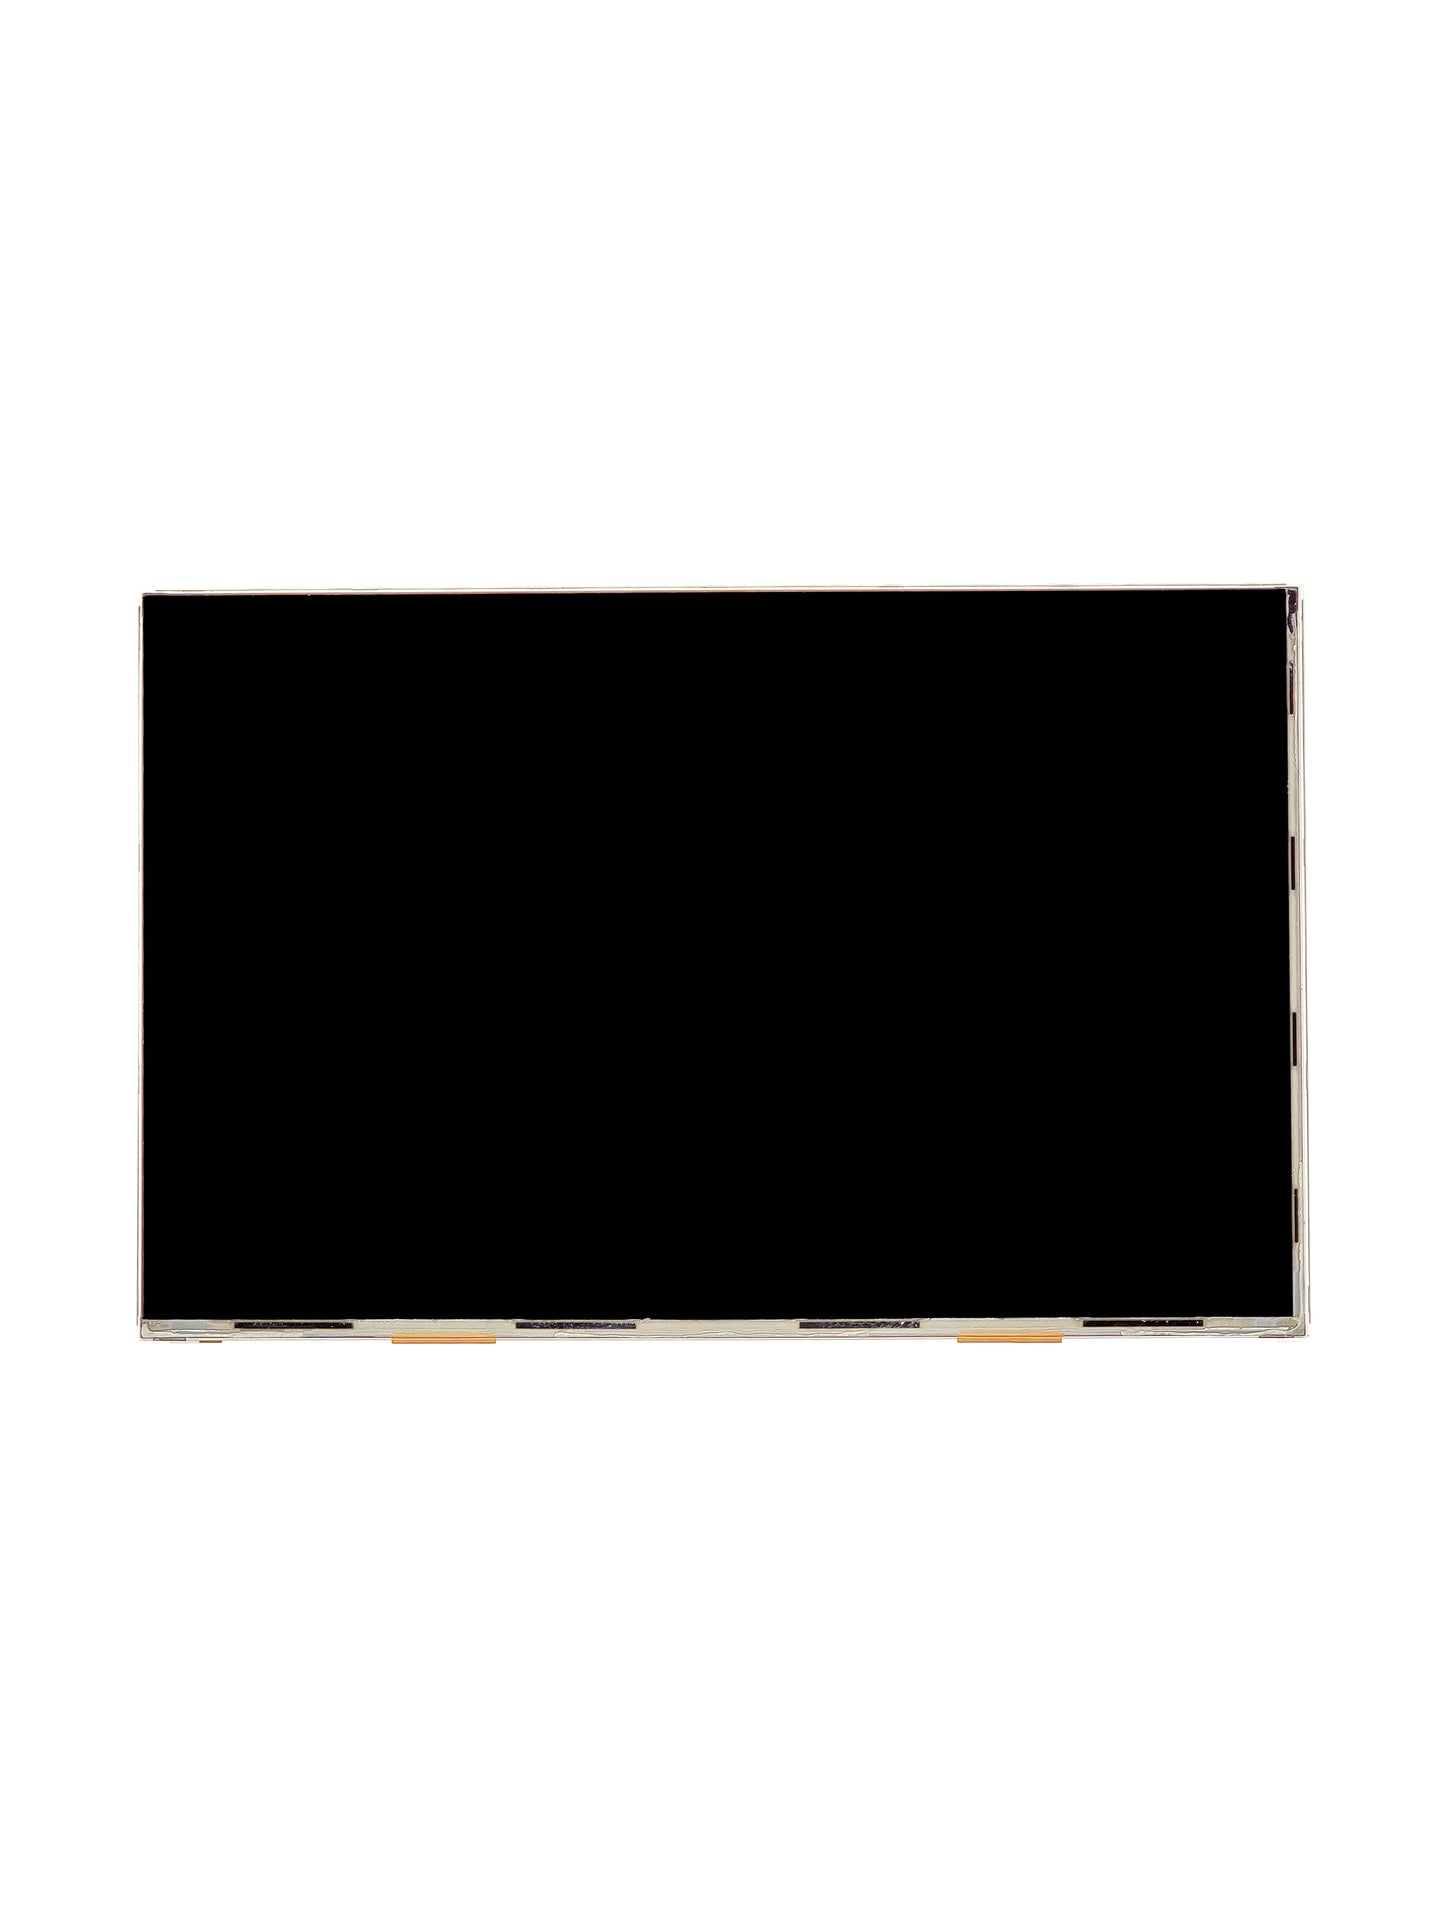 SGT Tab Pro 10.1" (T520) LCD only